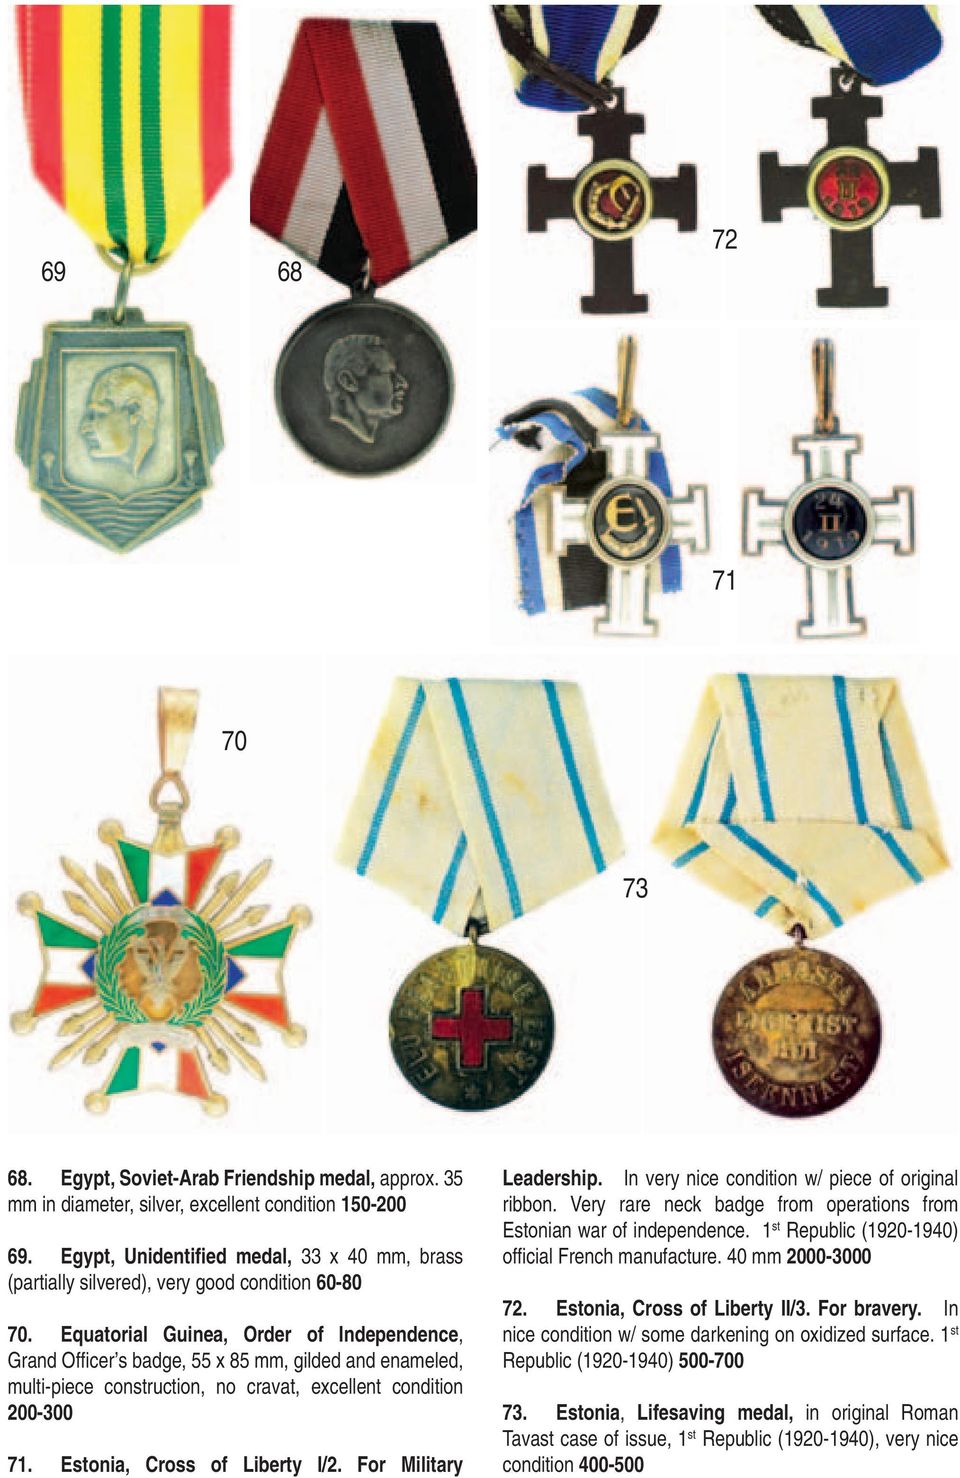 Equatorial Guinea, Order of Independence, Grand Offi cer s badge, 55 x 85 mm, gilded and enameled, multi-piece construction, no cravat, excellent condition 200-300 71. Estonia, Cross of Liberty I/2.